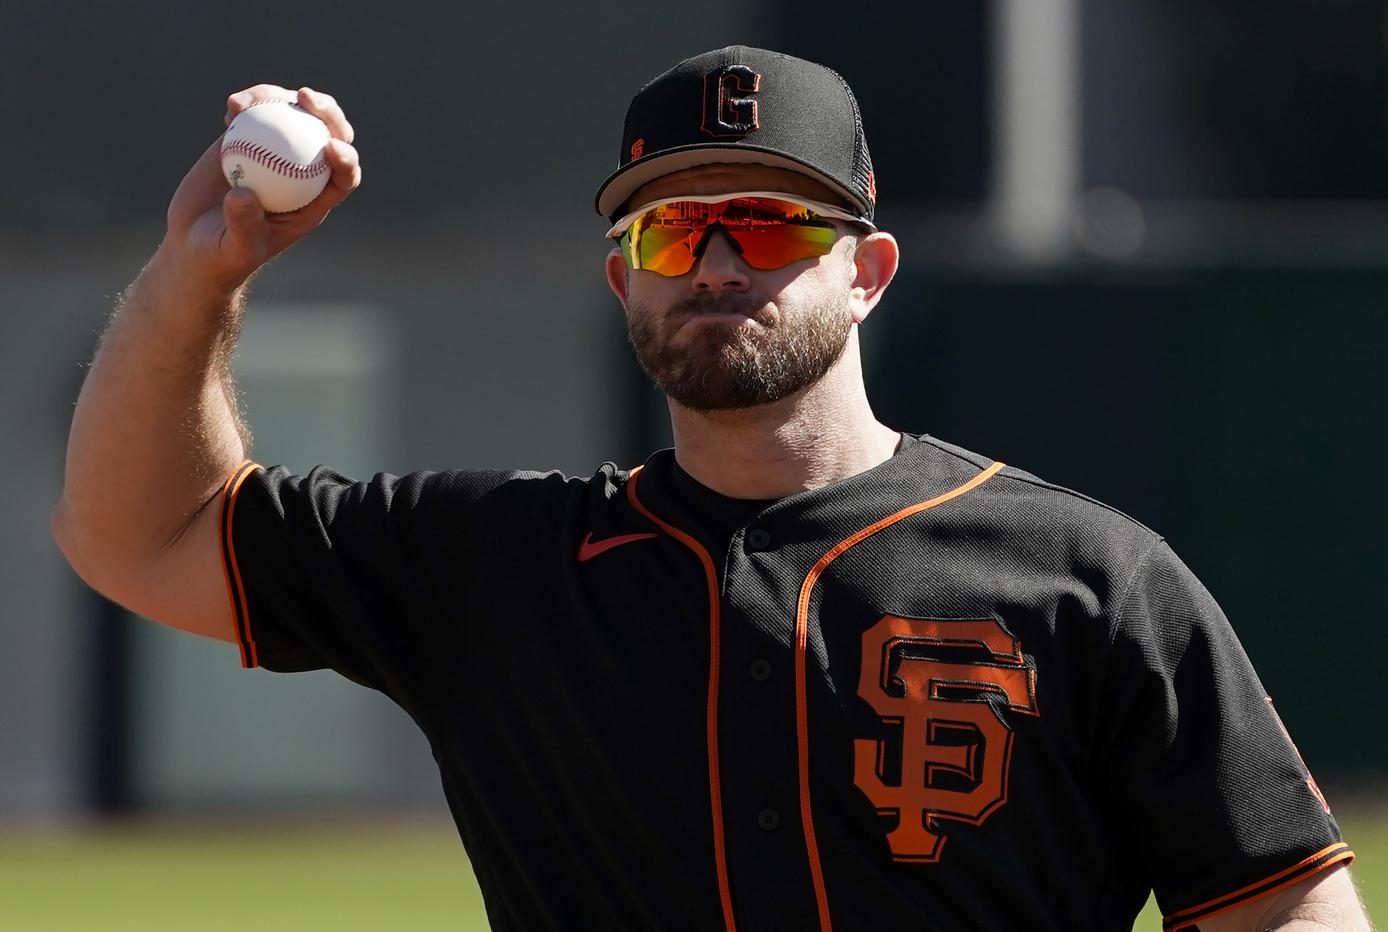 San Francisco Giants' trade for Evan Longoria carries significant